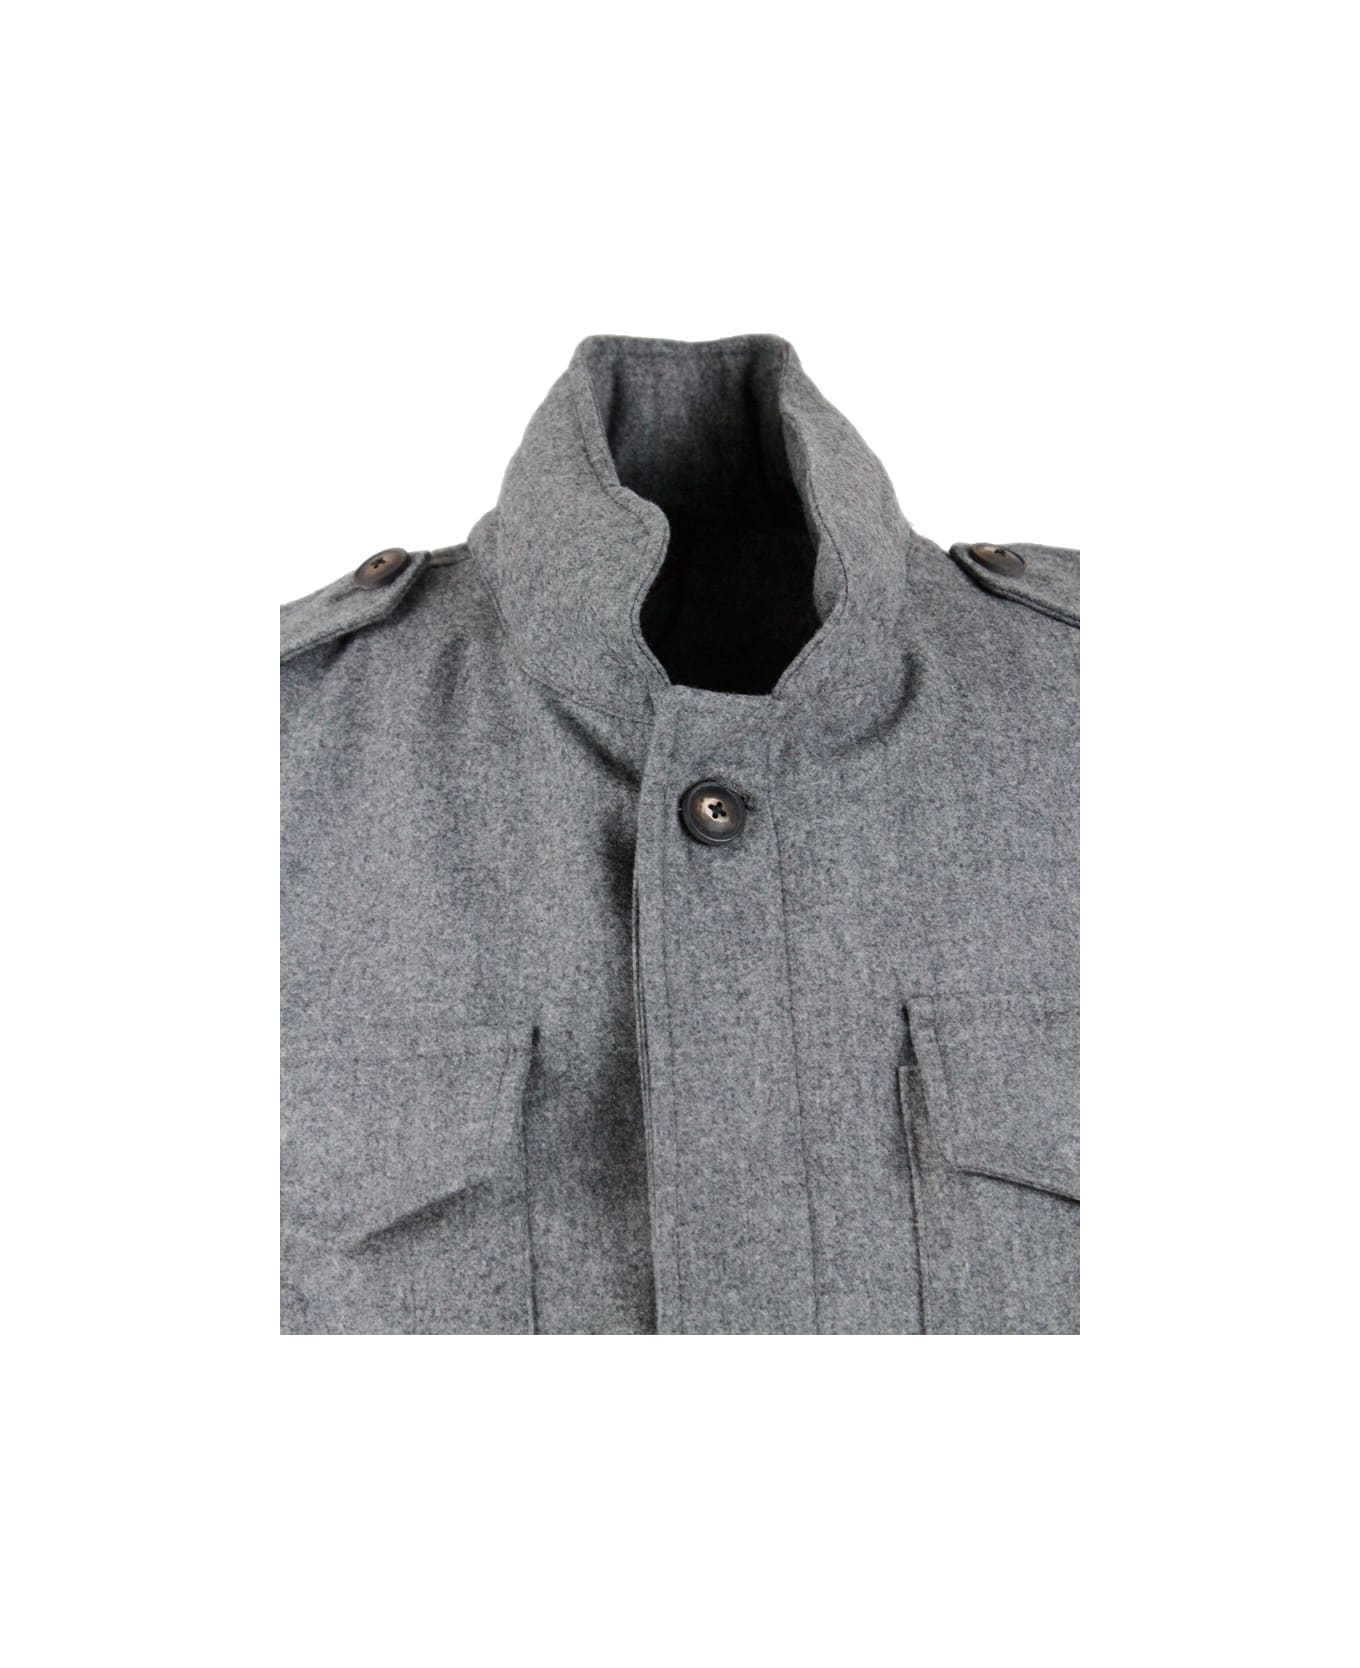 Barba Napoli Men's Field Jacket In Pure Virgin Wool, Unlined With Internal Drawstring With Button Closure, Pockets And Concealed Hood - Grey ジャケット